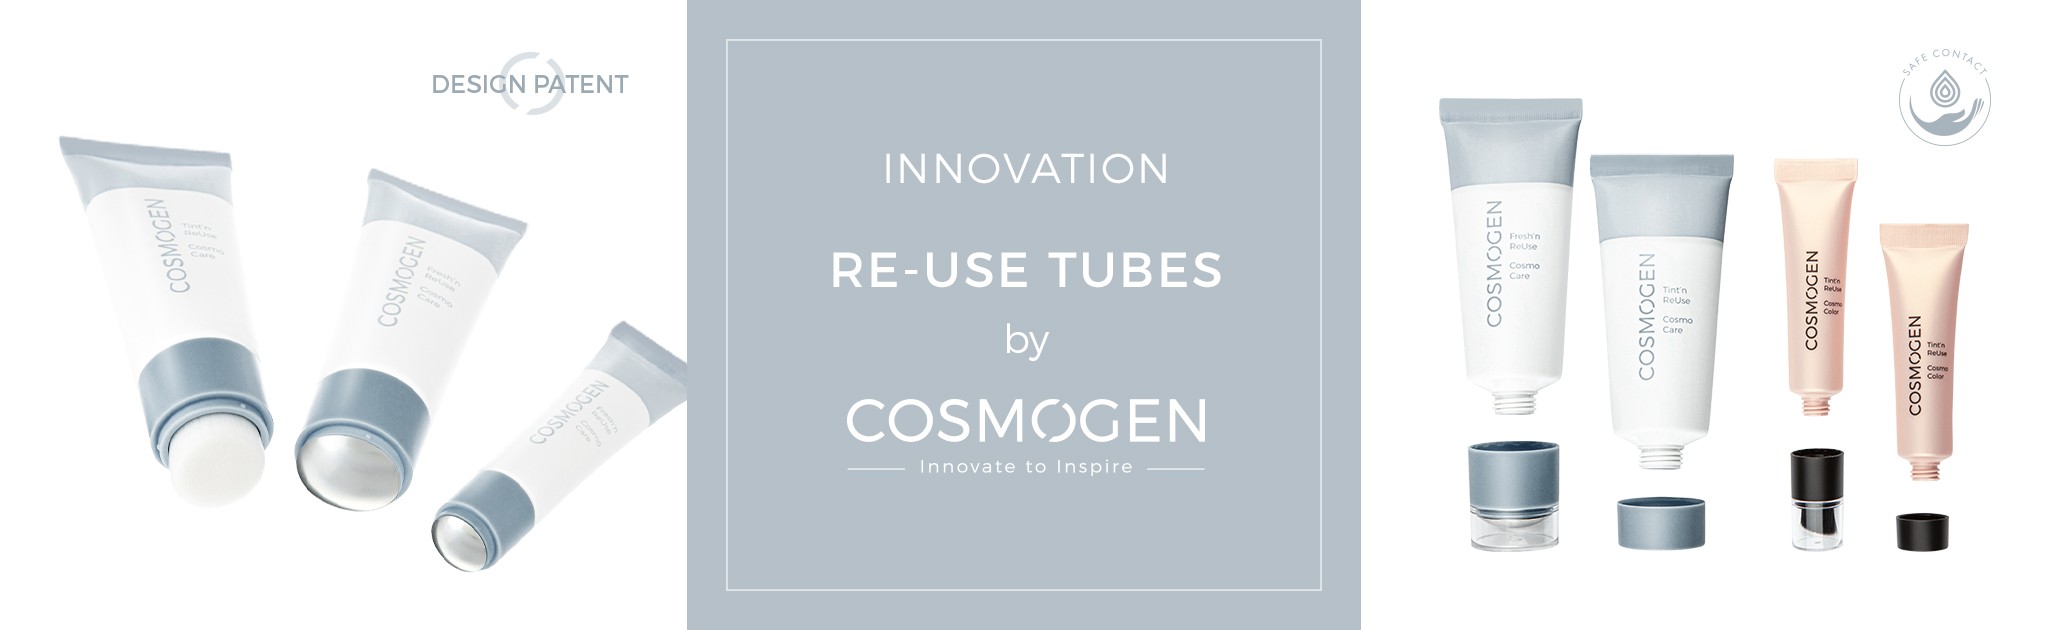 https://www.cosmogen.fr/d19-fresh-n-reuse.html?search_query=reuse&results=7